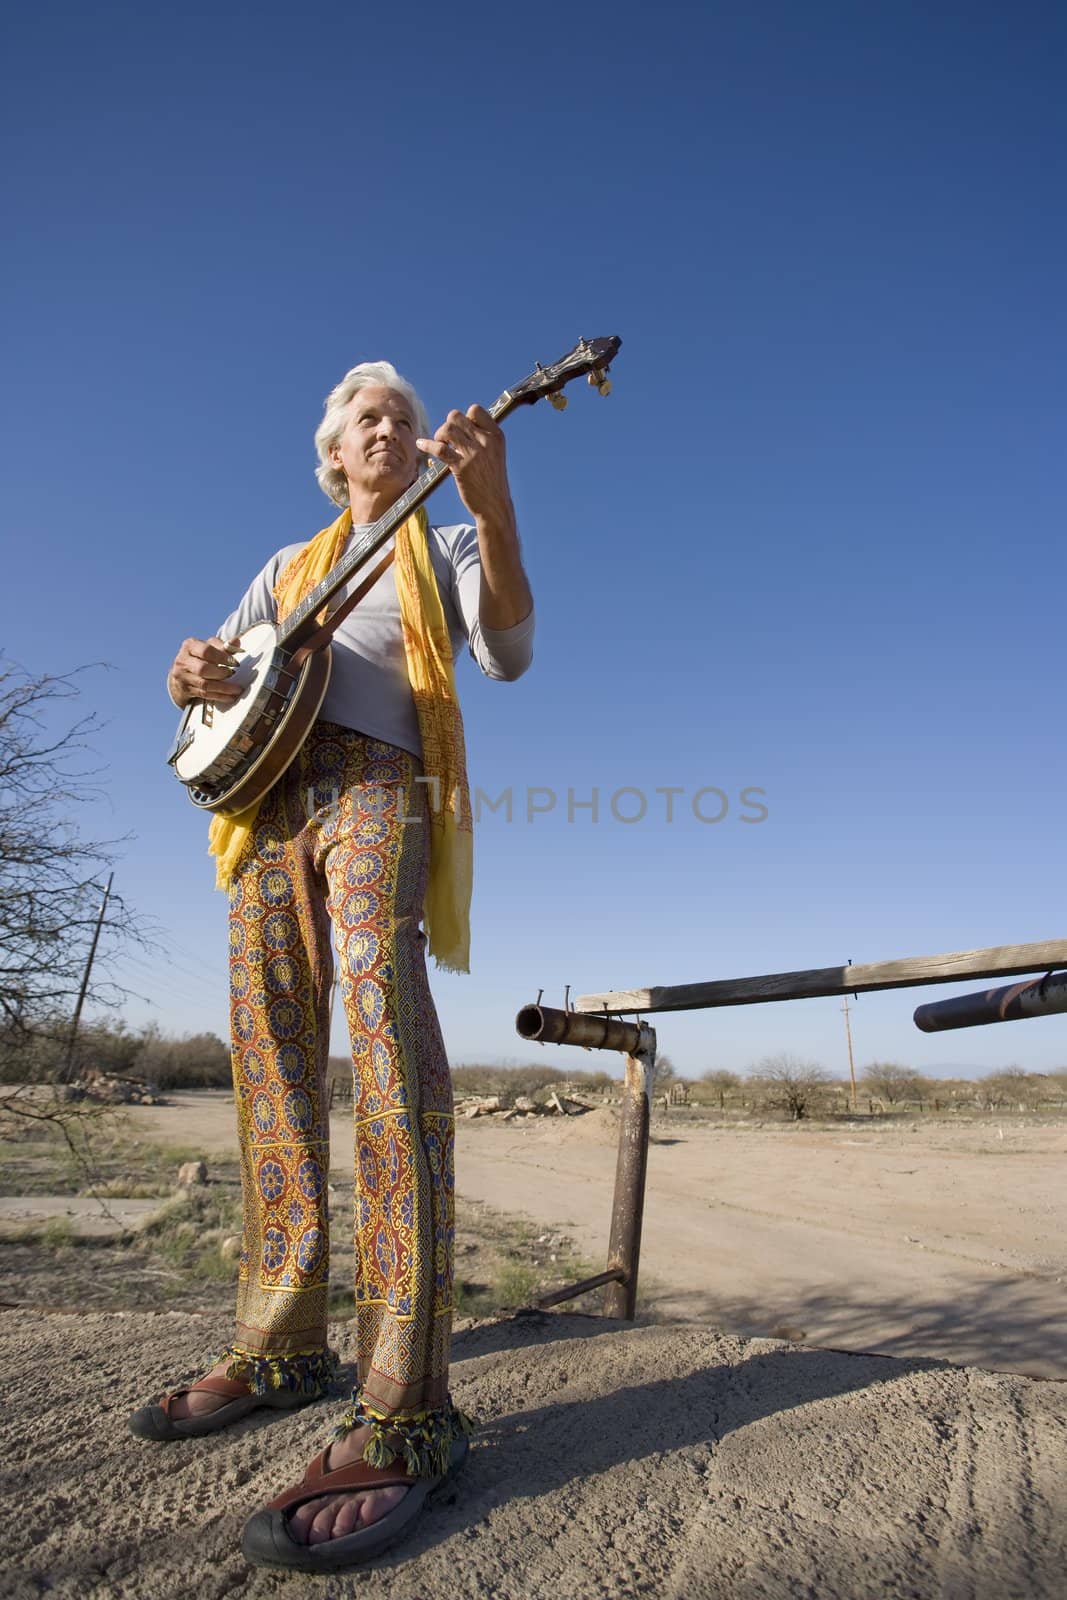 Banjo player standing against the blue sky